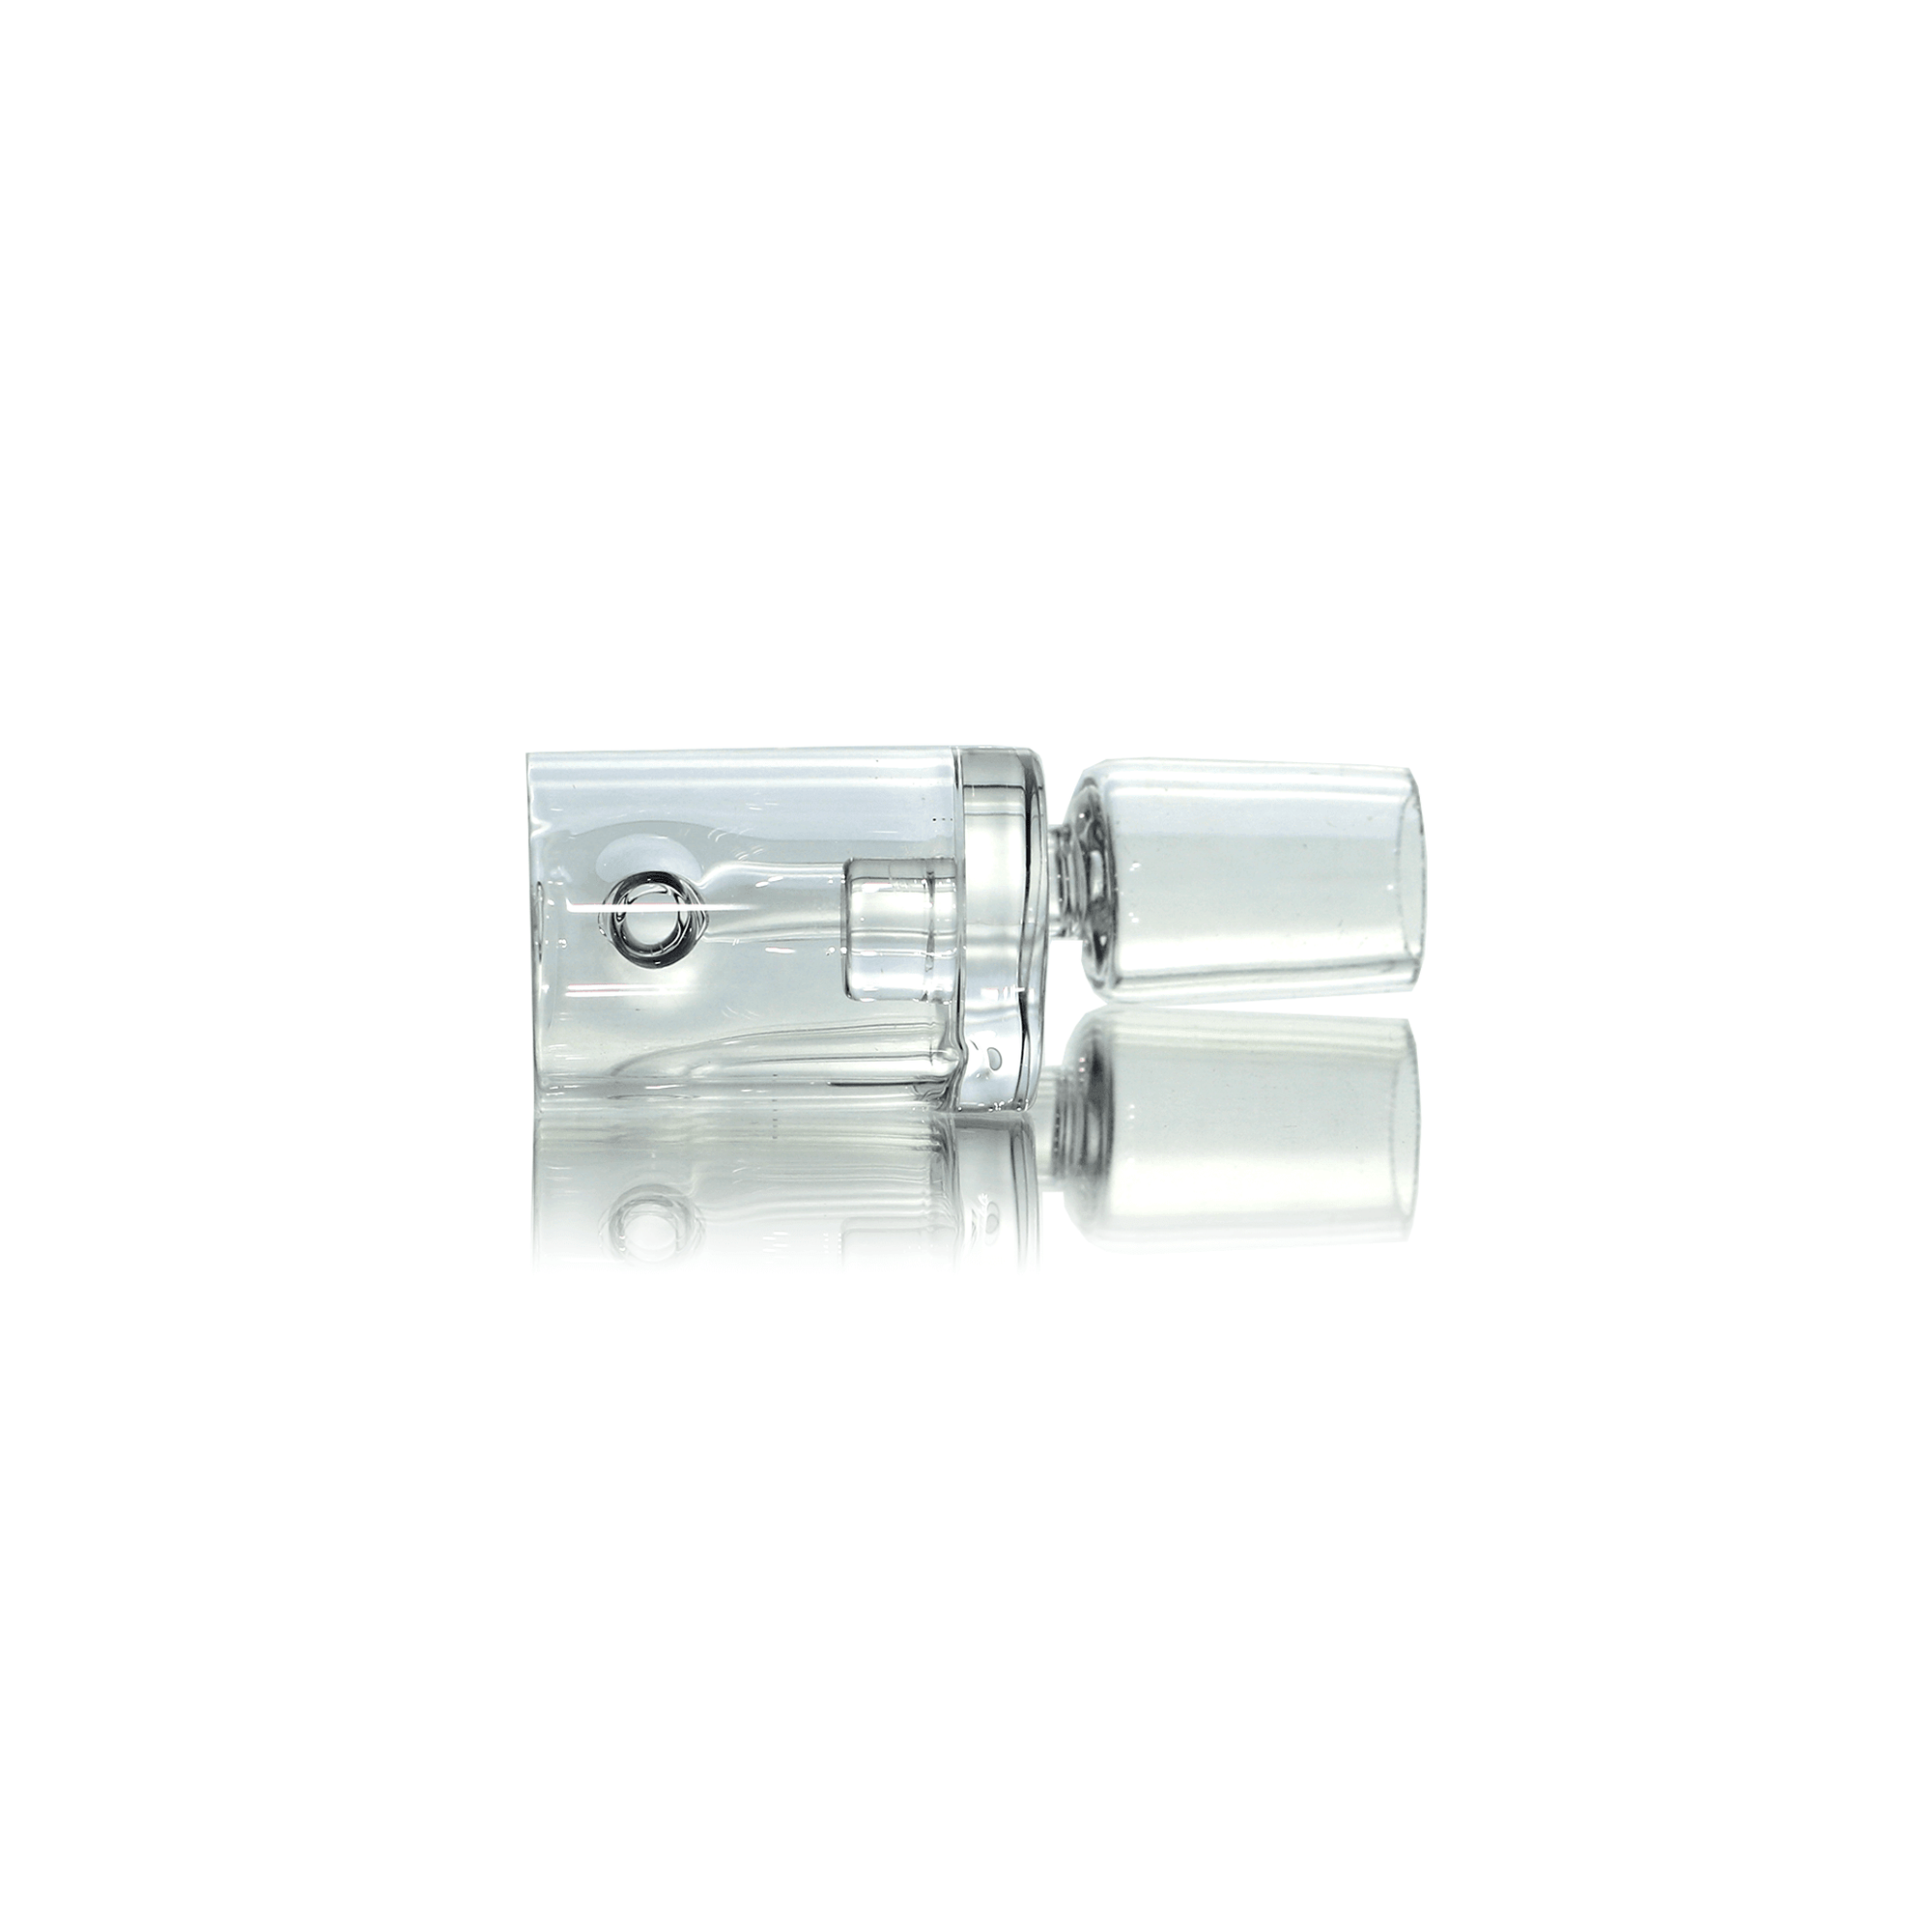 Quartz Banger Core Reactor 18mm Male With Saucer Cap | Complete Kit View | Dabbing Warehouse